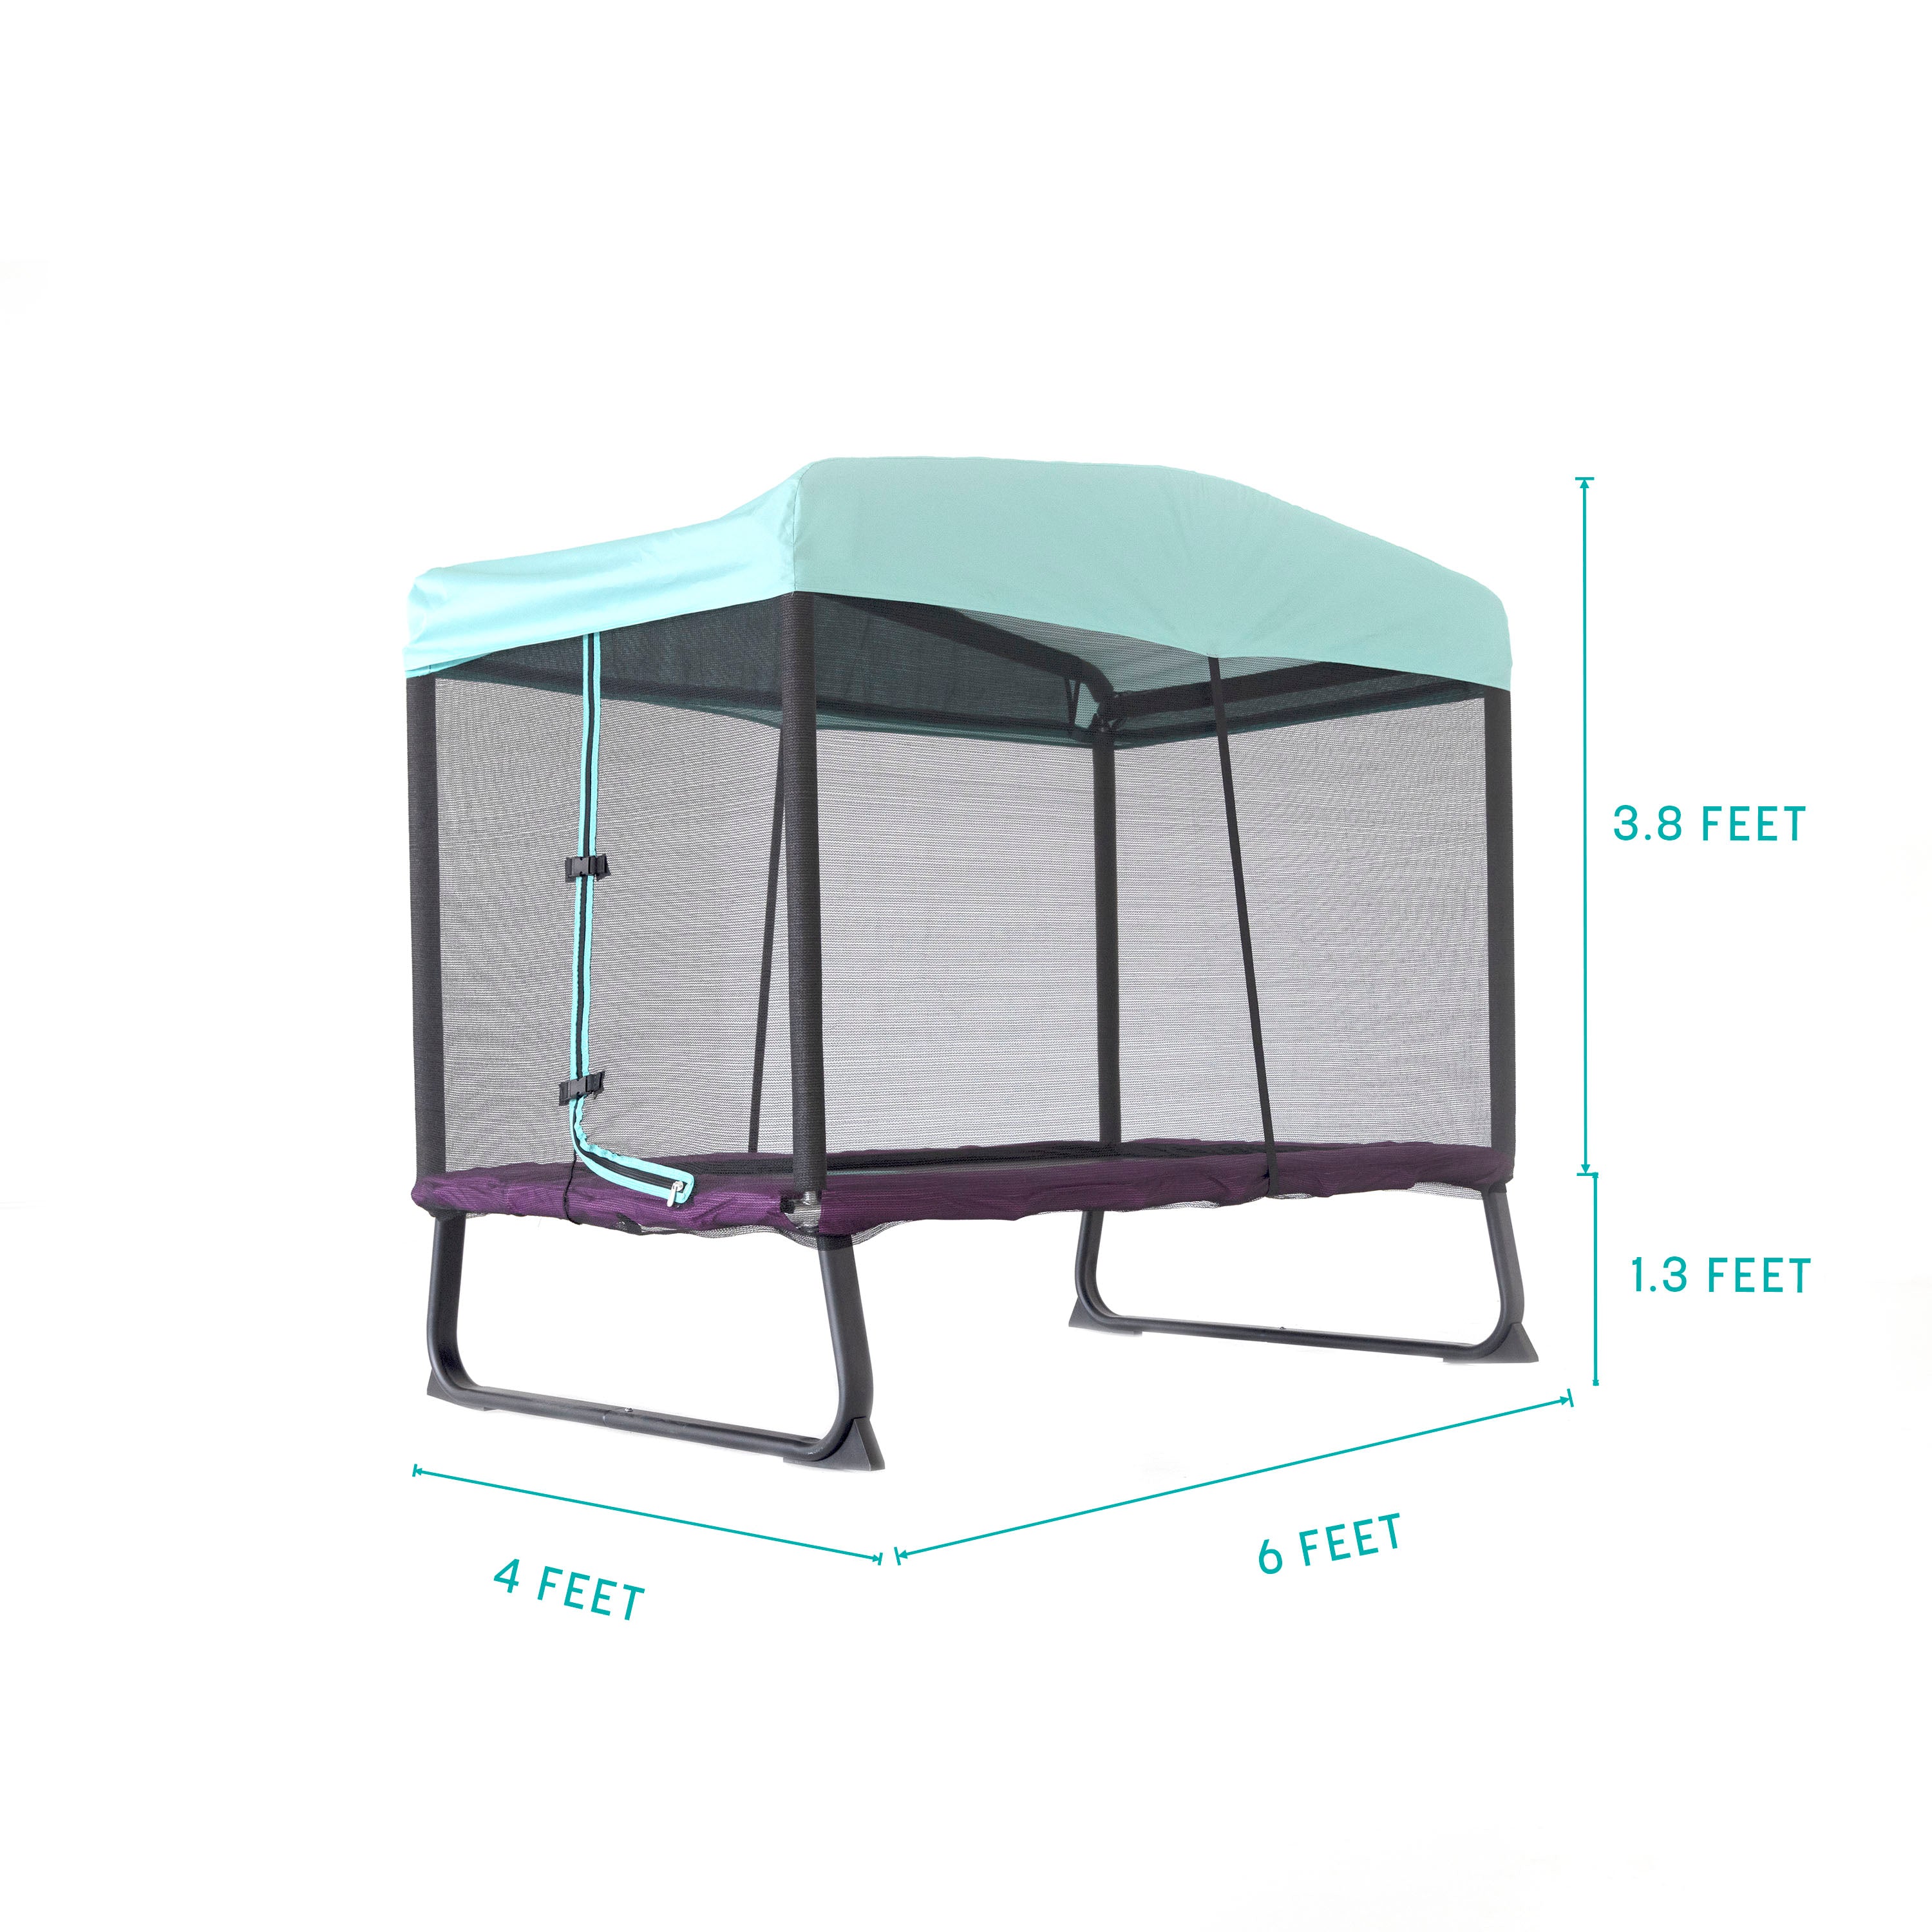 The Eeyore rectangle trampoline is 4 feet wide, 6 feet long, 1.3 feet from ground to frame, and 3.8 feet from frame to top of canopy. 